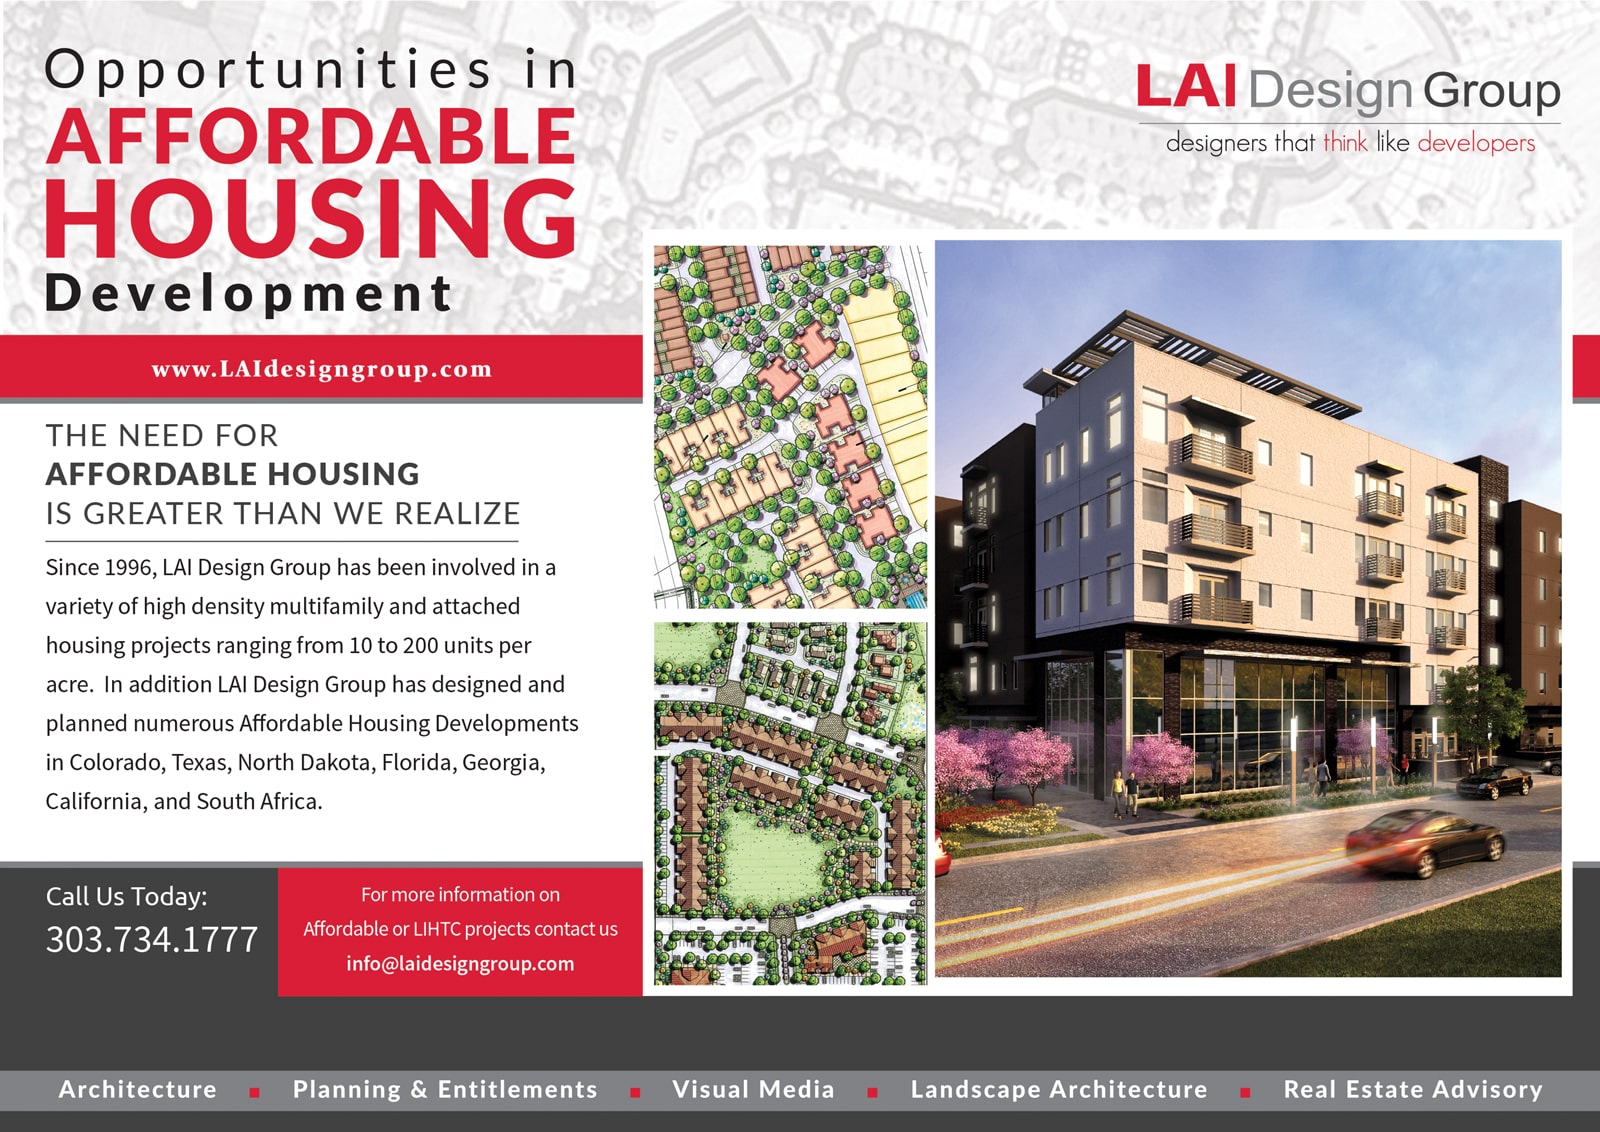 Architects that specialize in  Affordable Housing Development